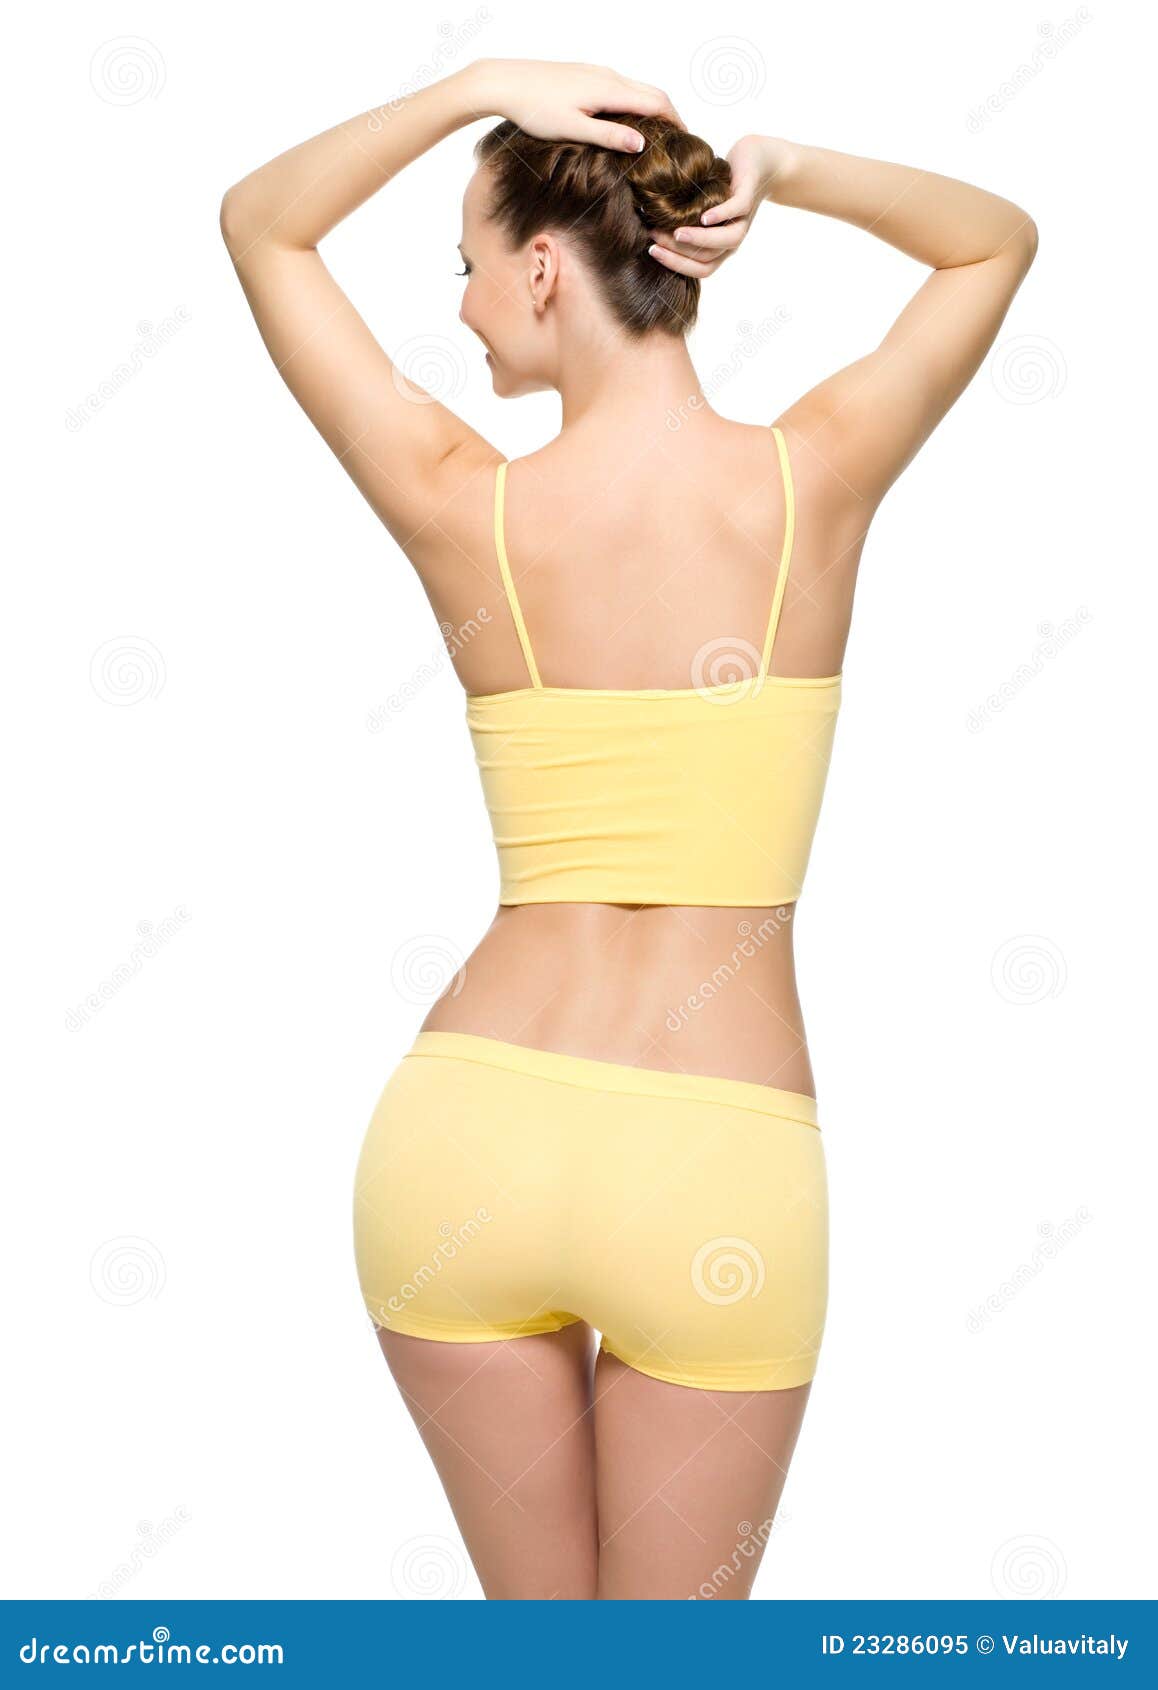 Perfect Female Body with Thin Waist Stock Image - Image of